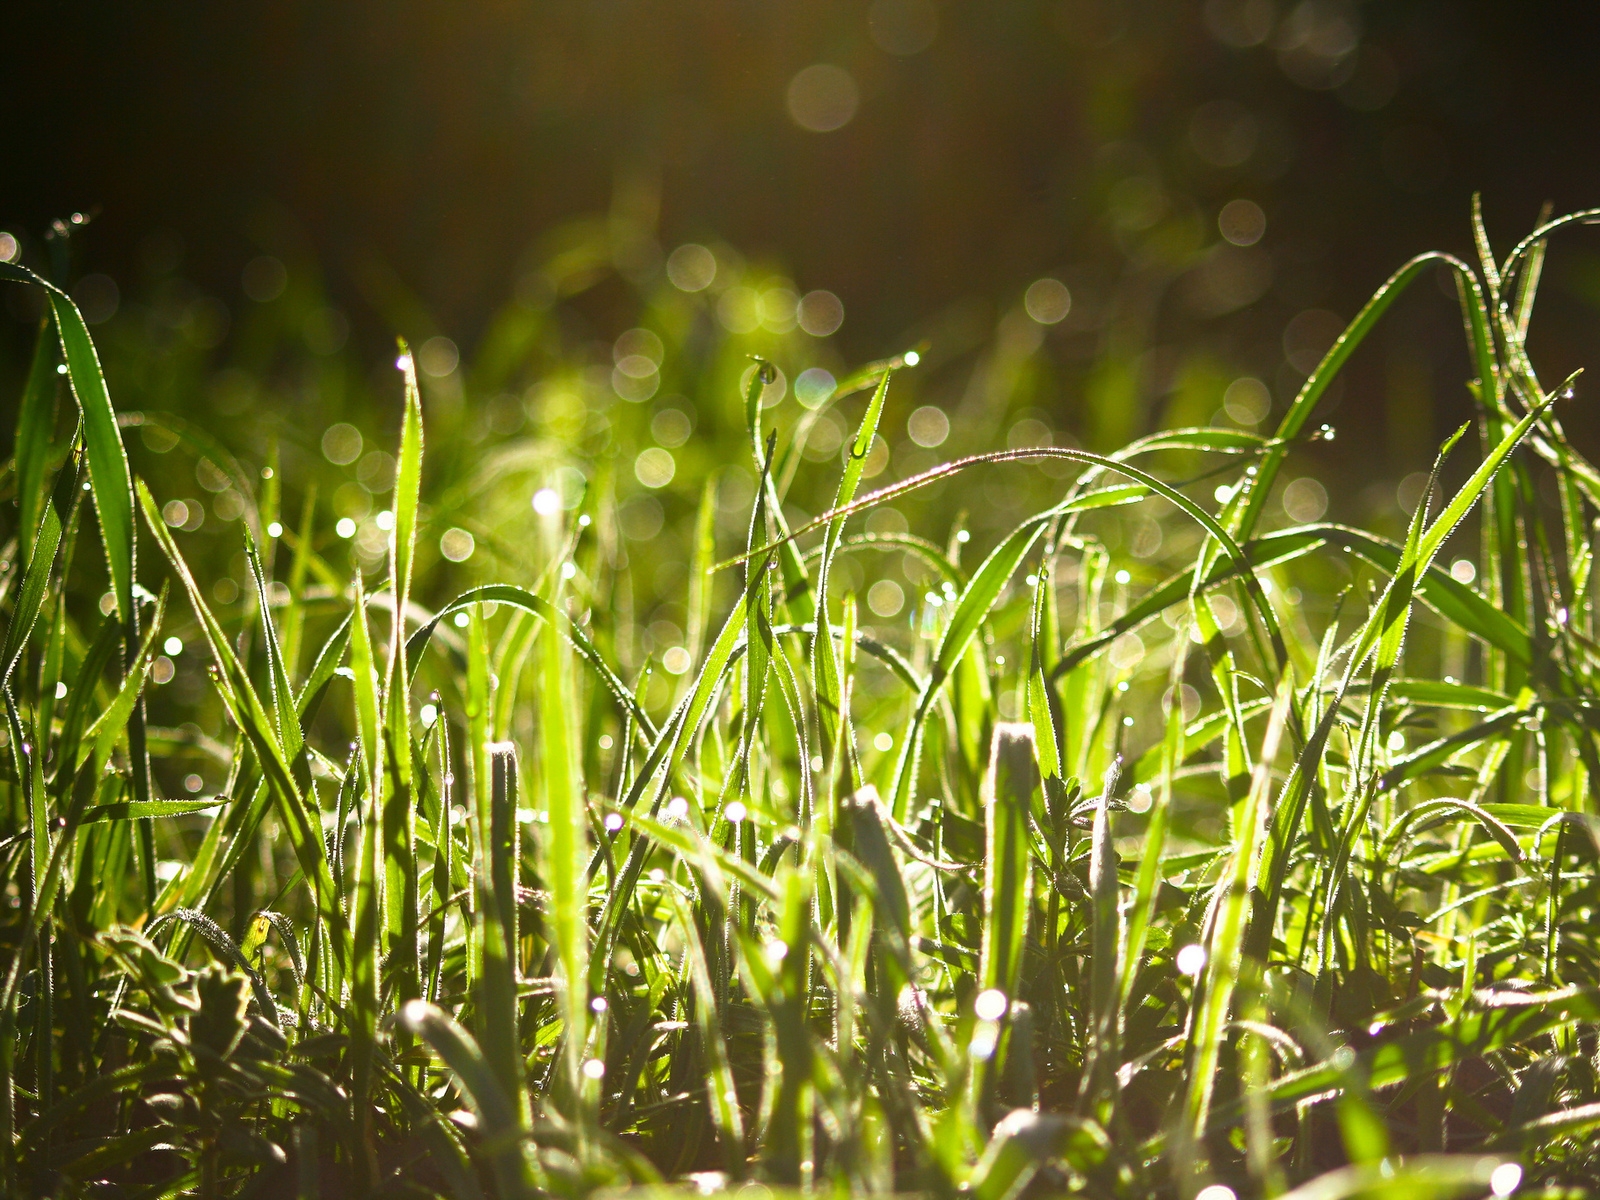 Wet Grass In The Sun  for 1600 x 1200 resolution